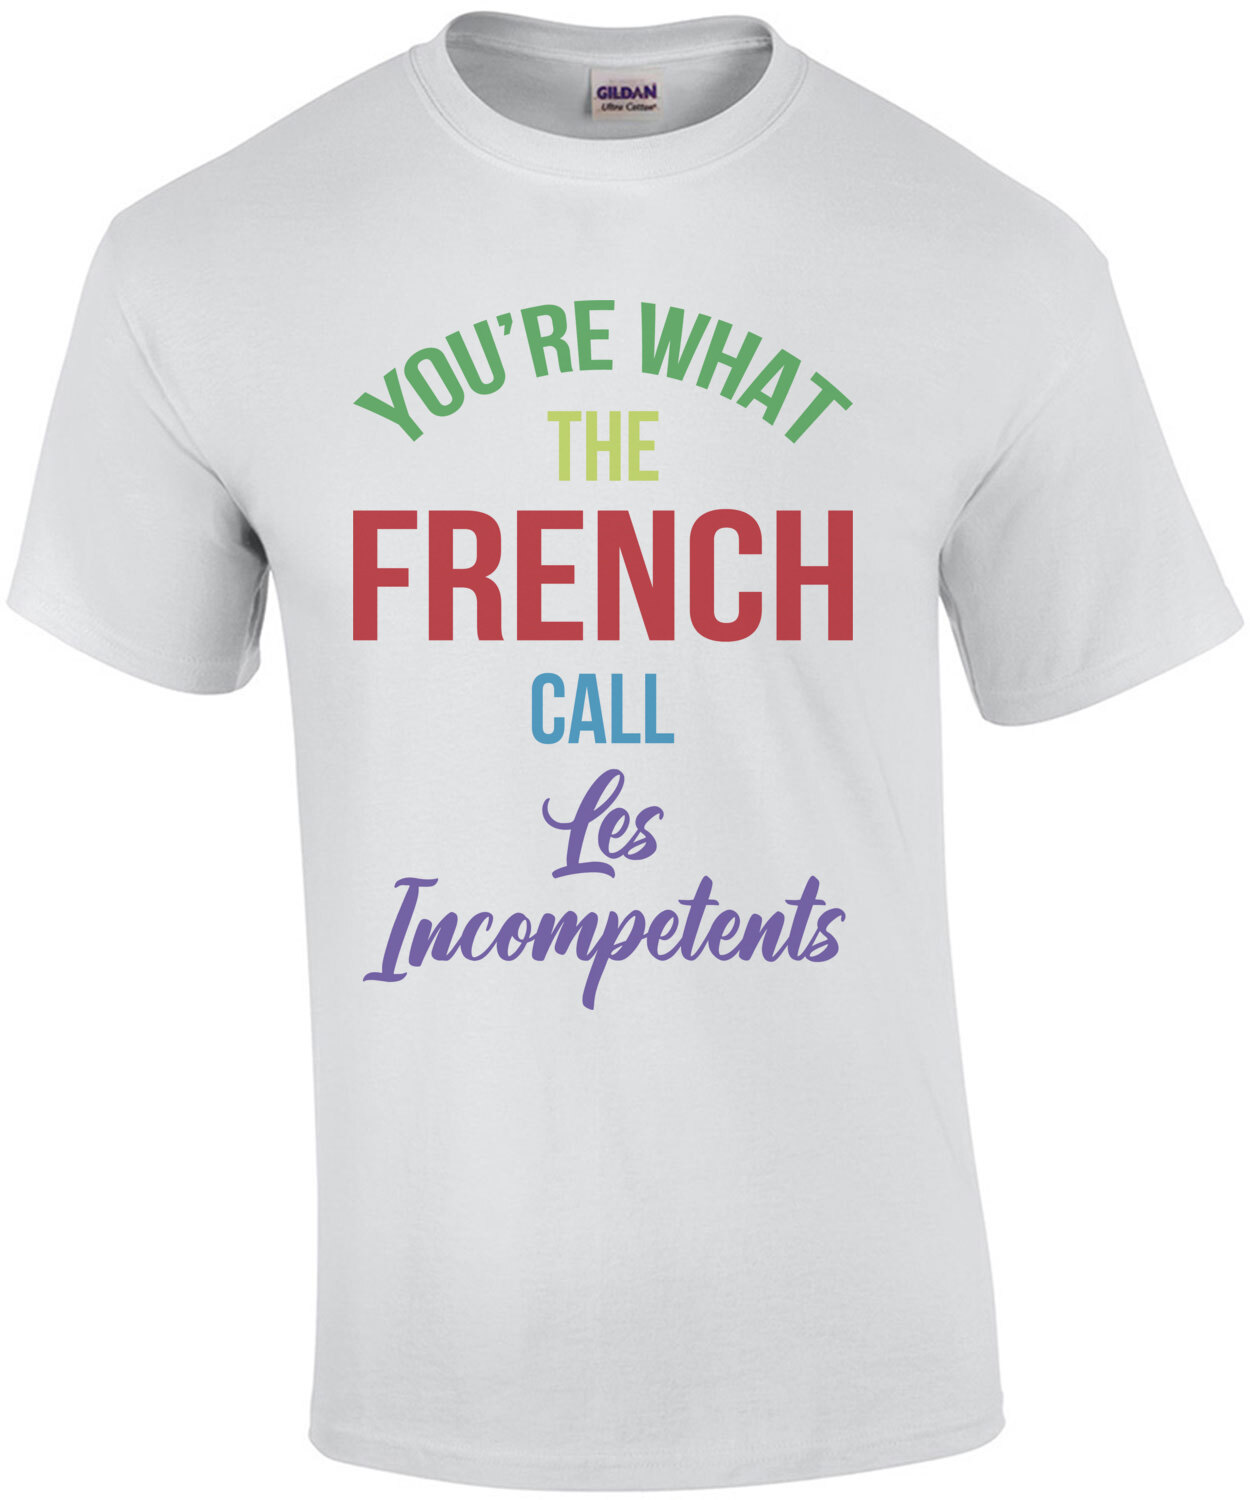 You're what the French call Les Incompetents - Home Alone - Funny ...